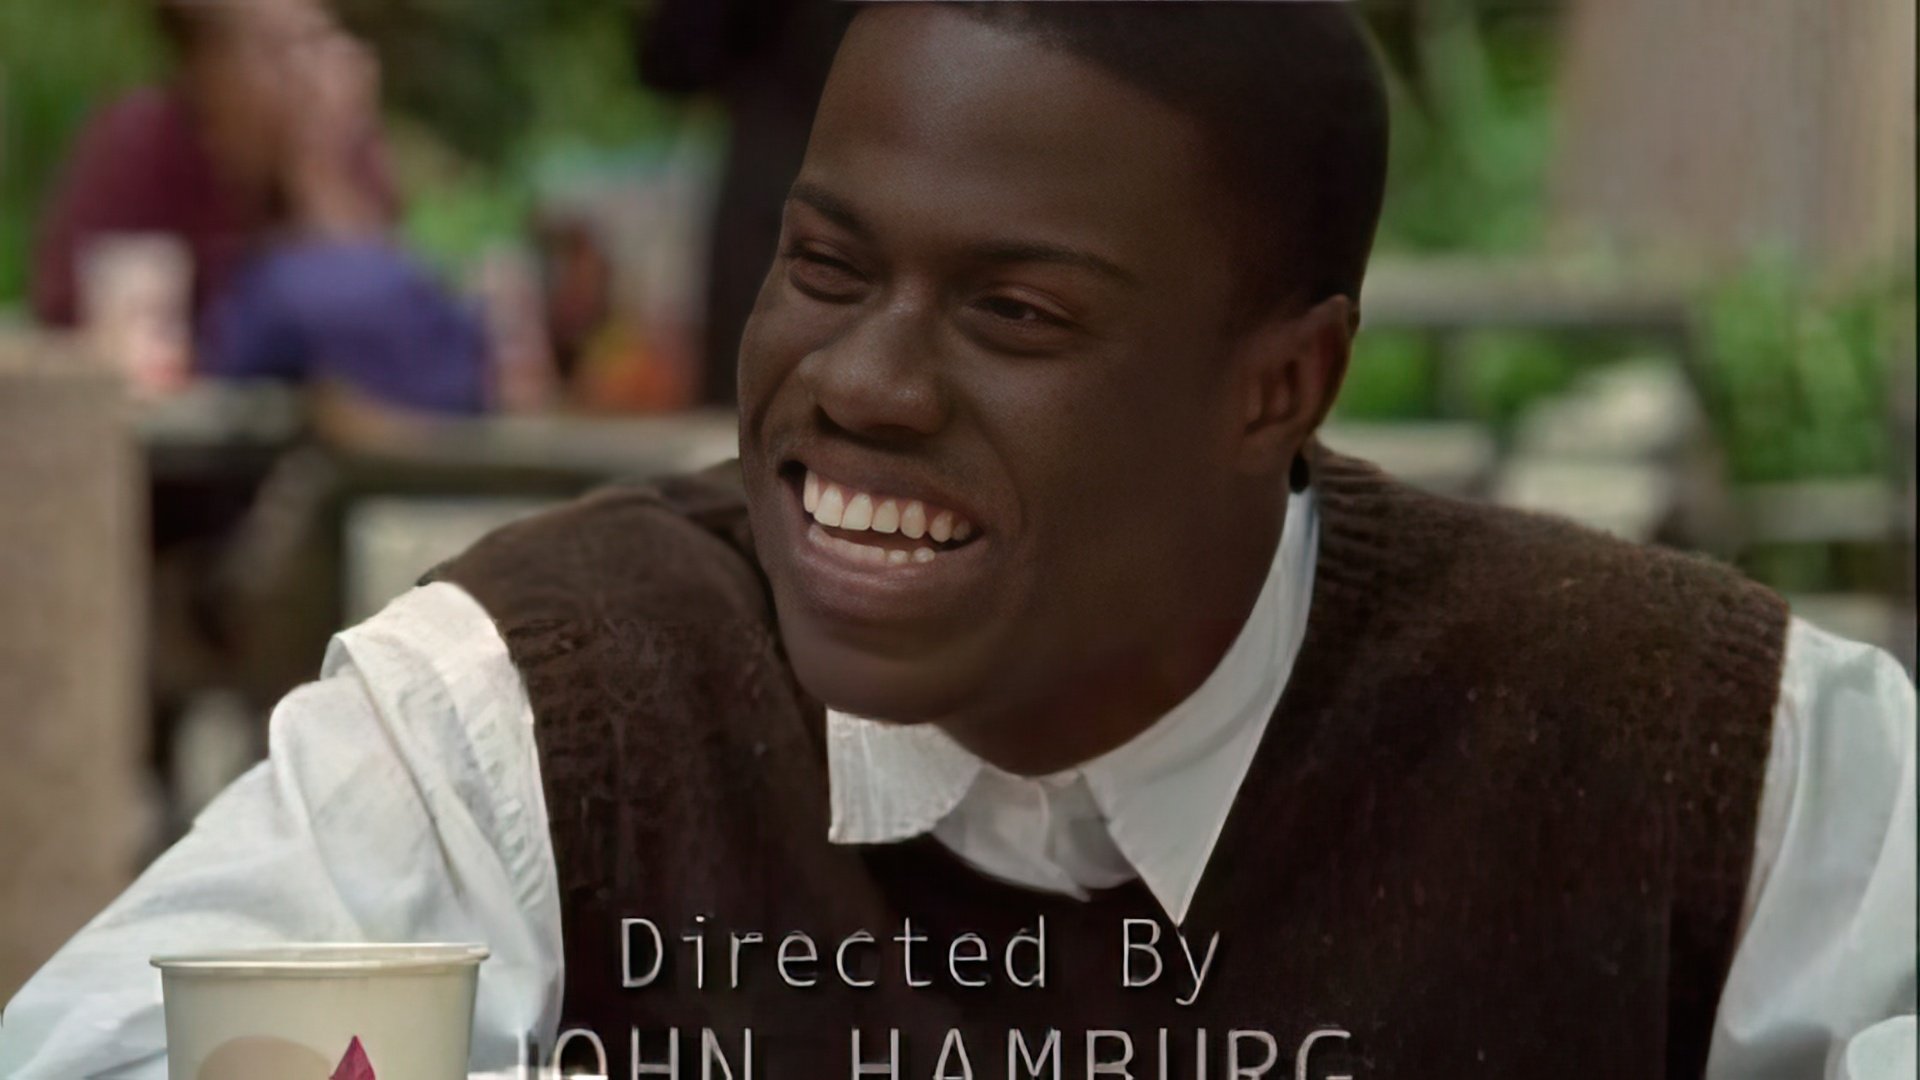 Kevin Hart’s first movie role